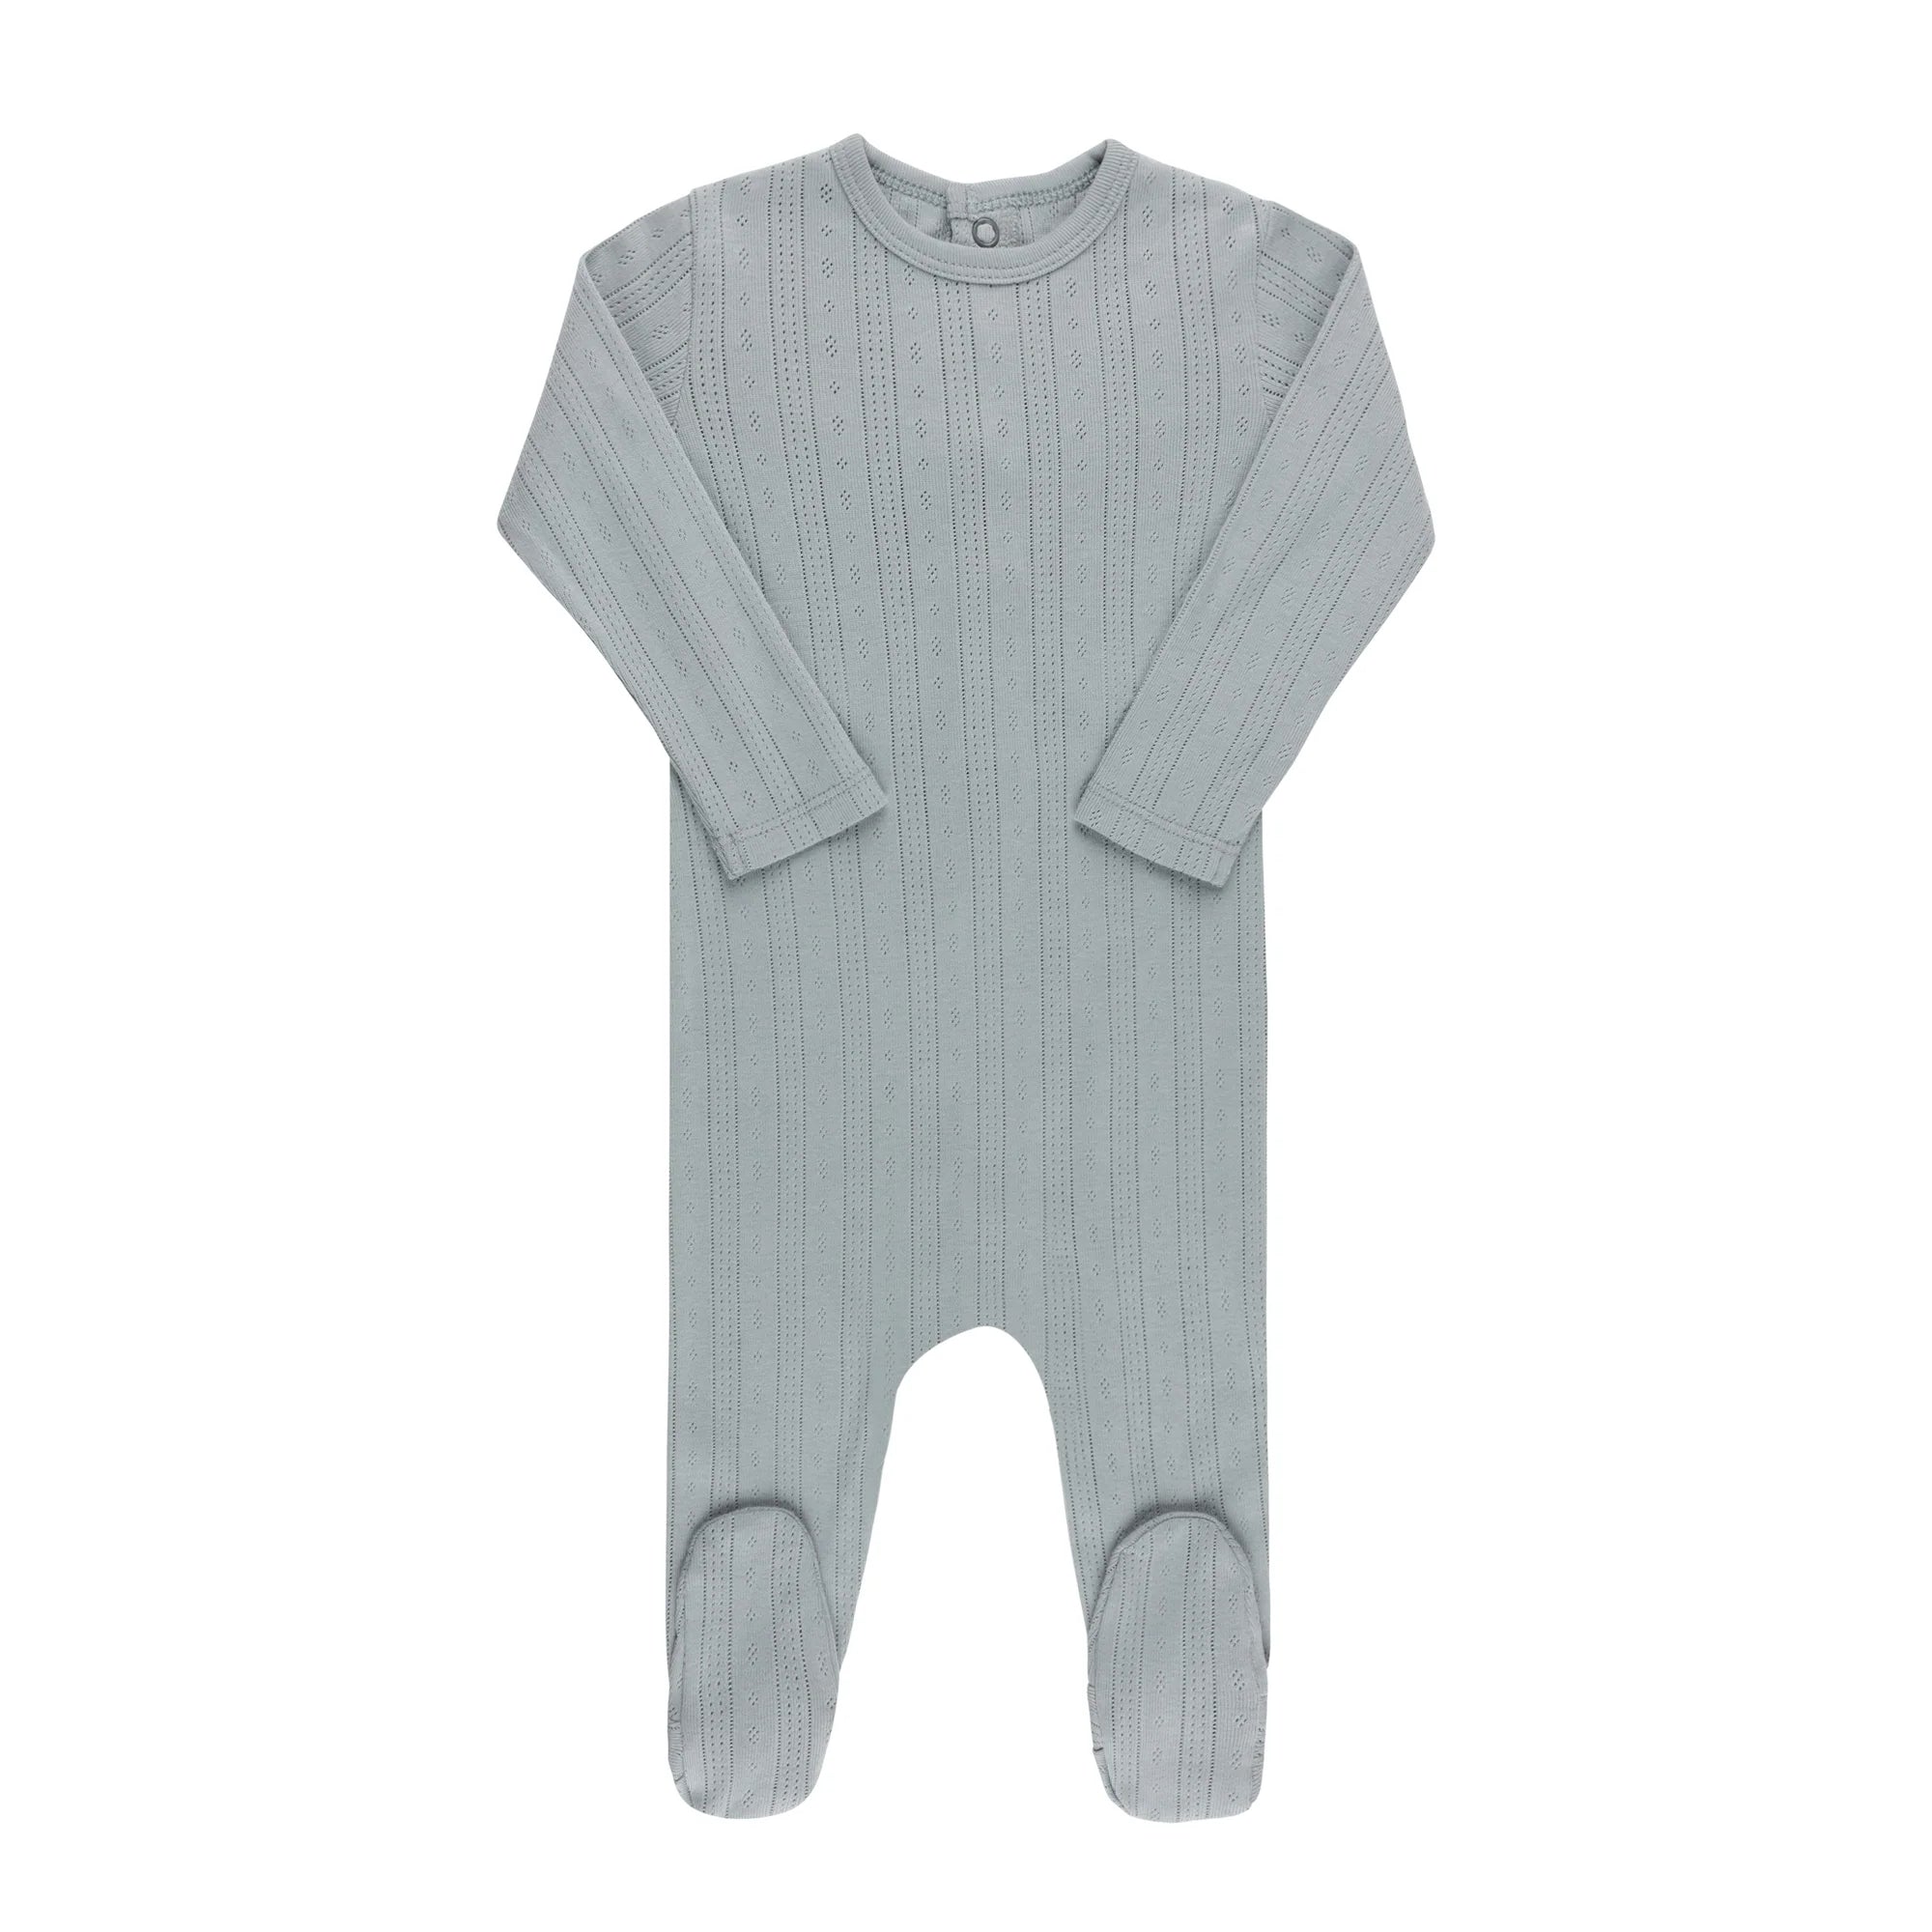 Ely's & Co Pointelle Collection Blue Footie